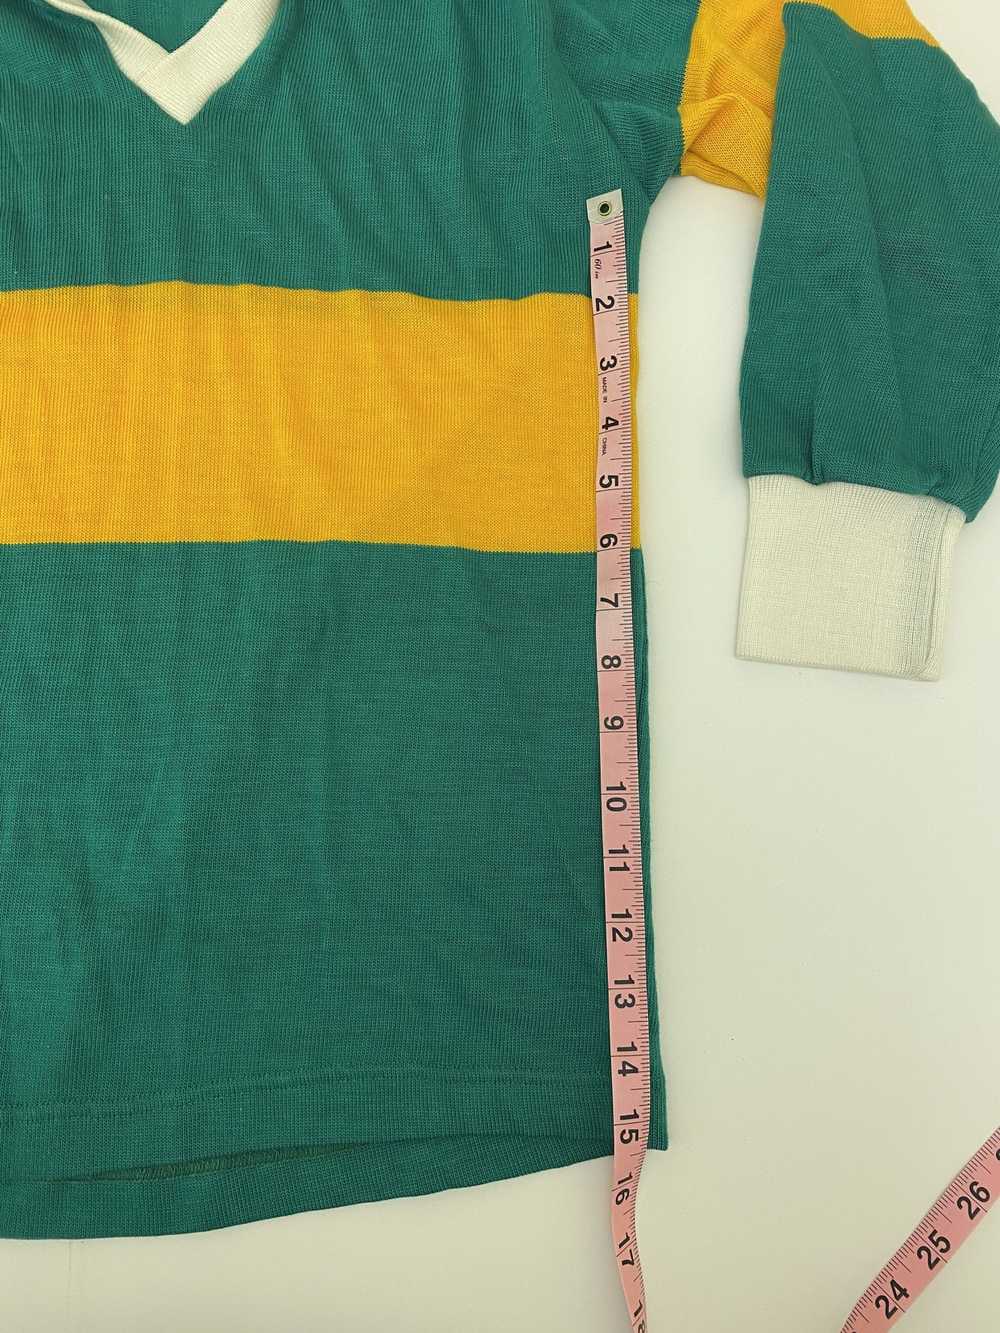 Oneill OLD rugby shirt - image 6